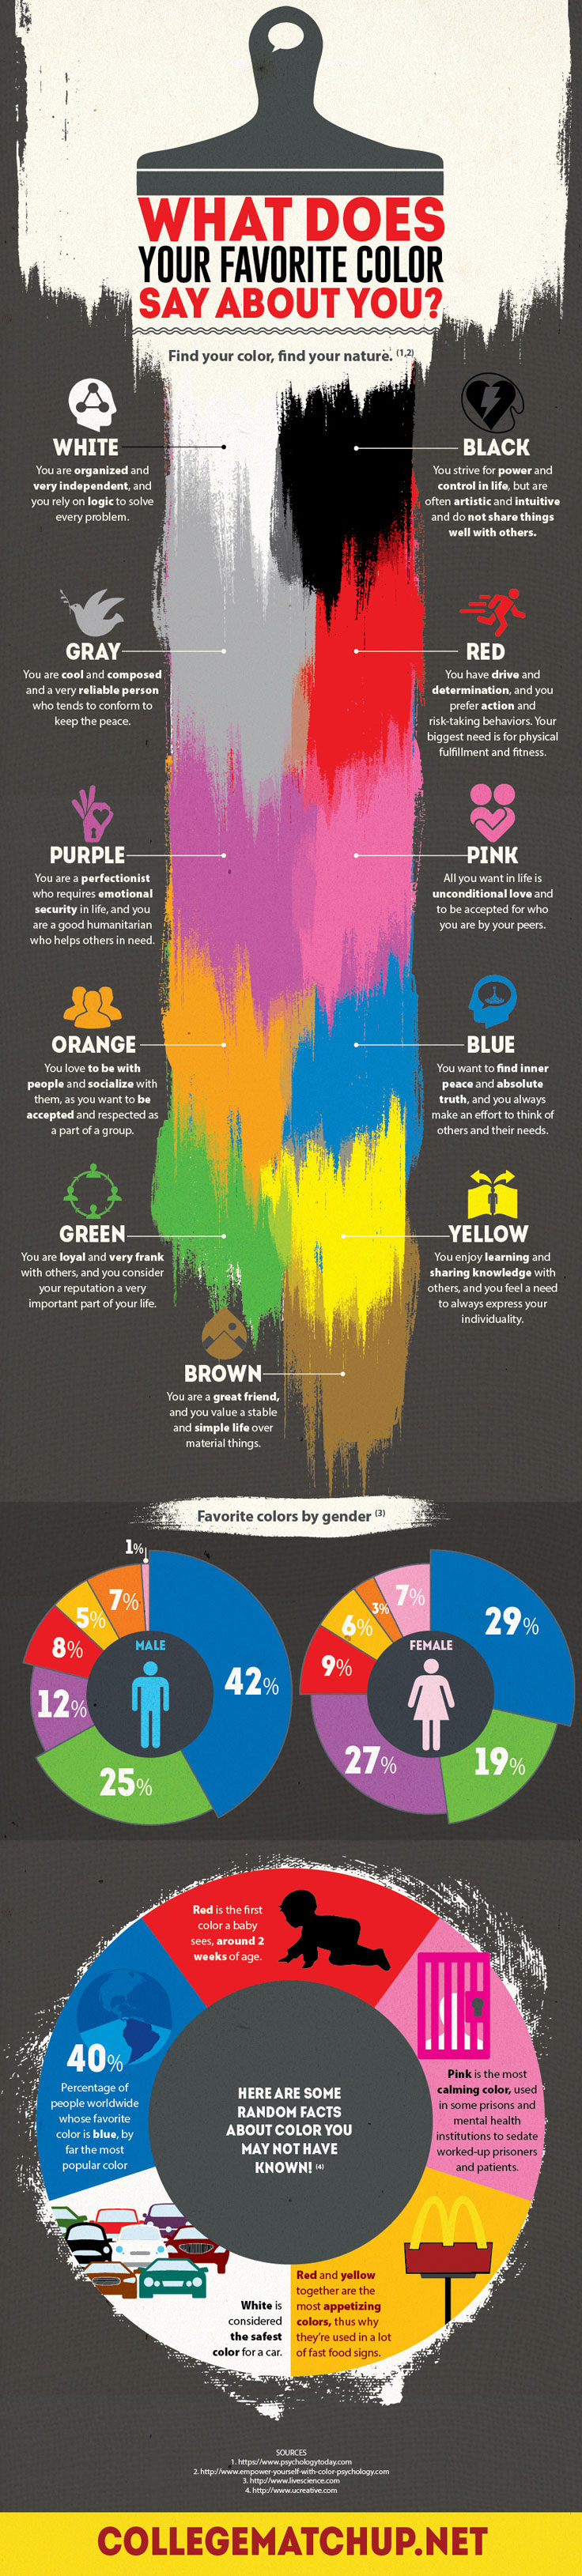 what does your favorite color say about you infographic